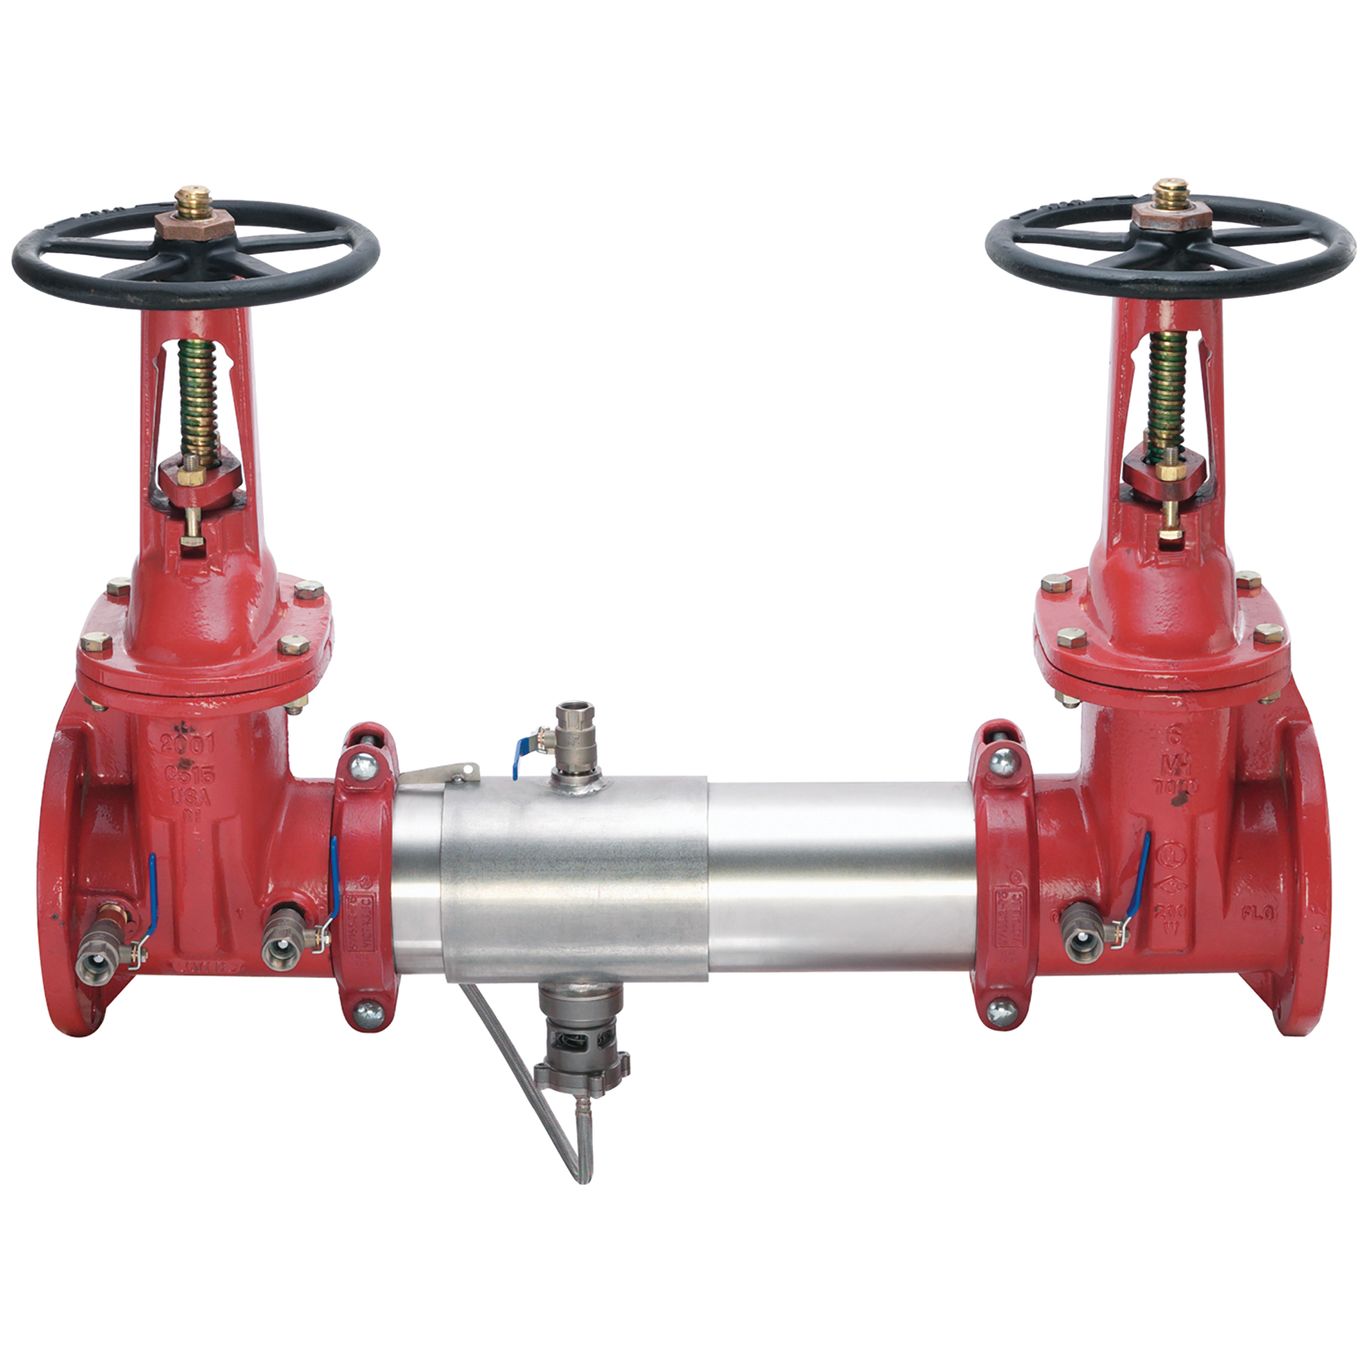 Reduced Pressure Zone Backflow Preventer, 4 Inch Size, Flanged, 304 Stainless Steel